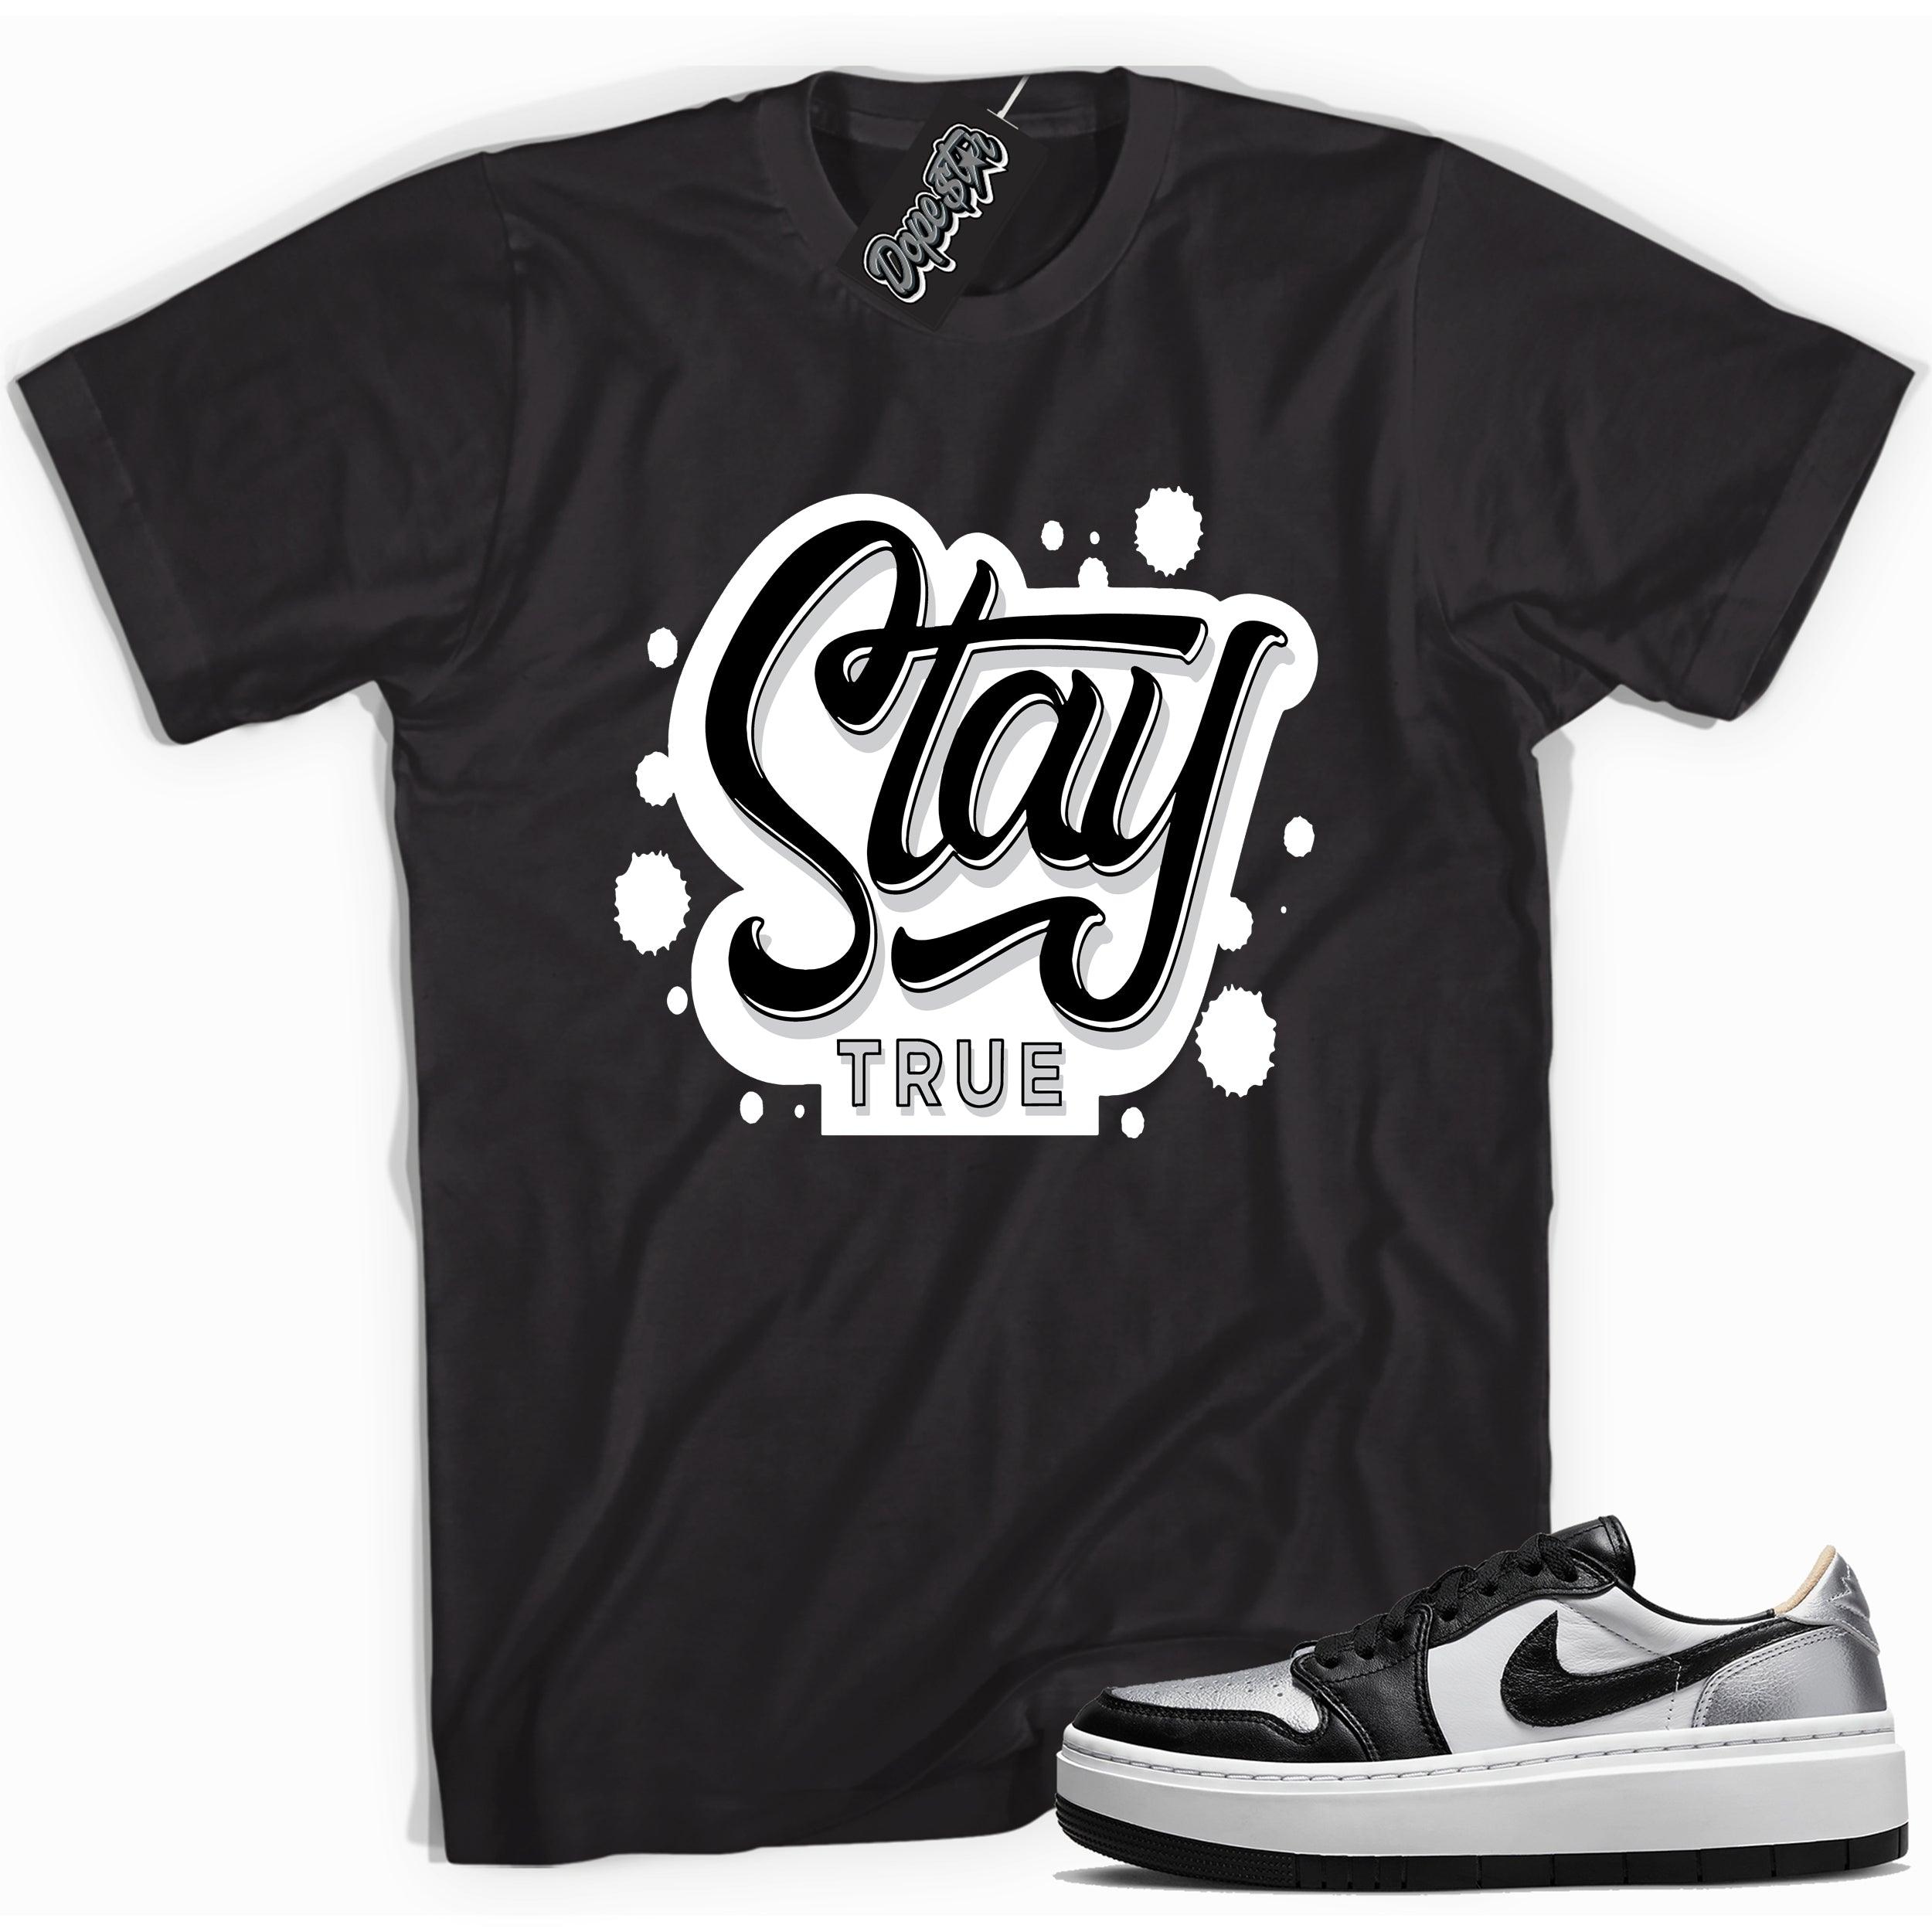 Cool black graphic tee with 'stay true' print, that perfectly matches Air Jordan 1 Elevate Low SE Silver Toe sneakers.